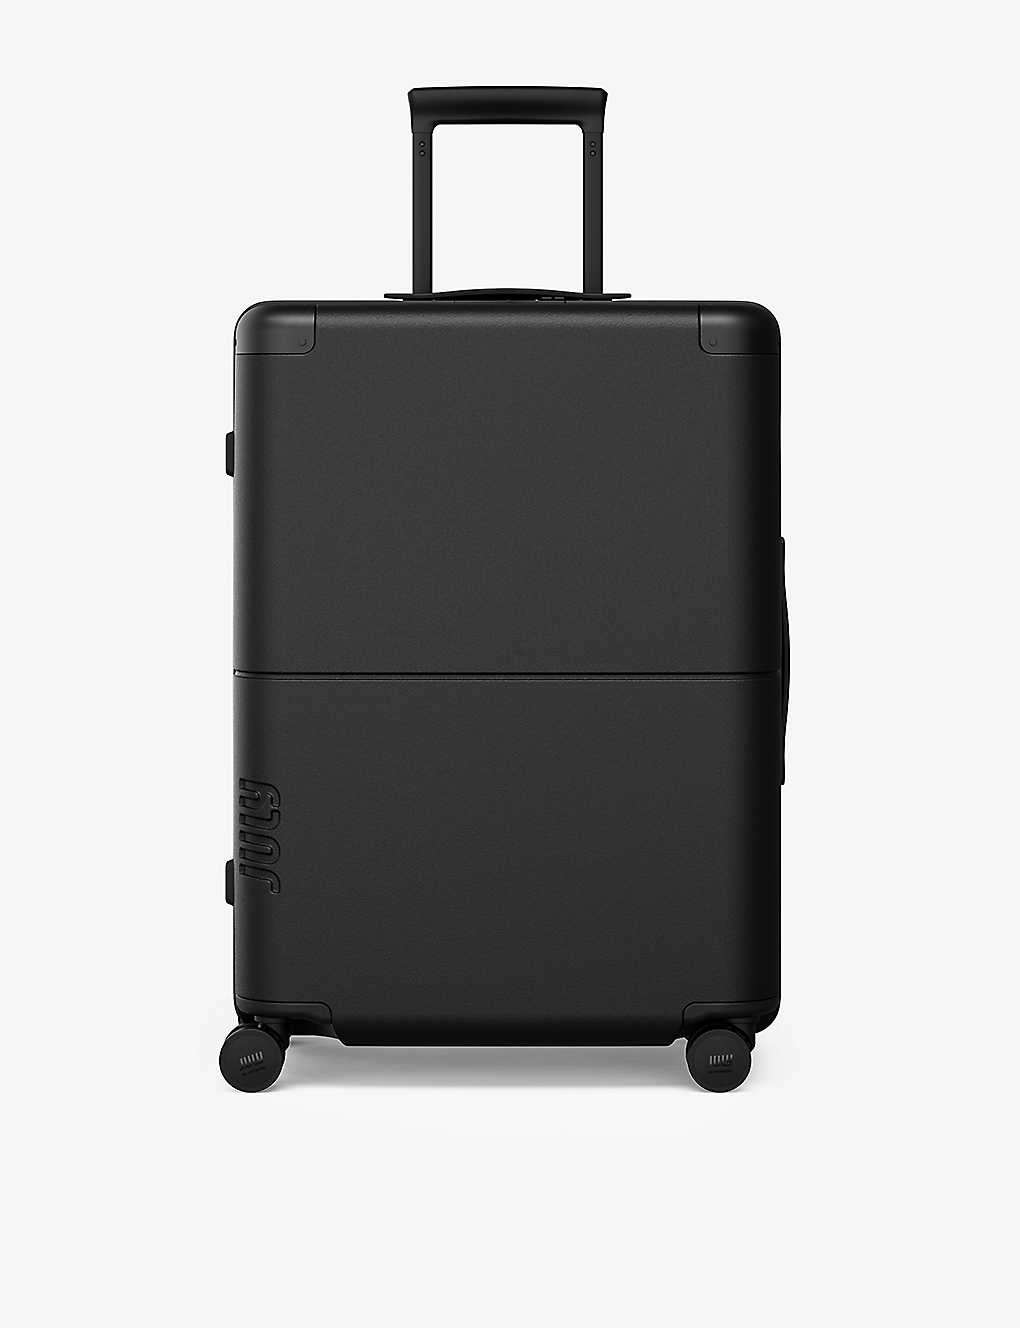 July Charcoal Checked Luggage Polycarbonate Suitcase 66cm